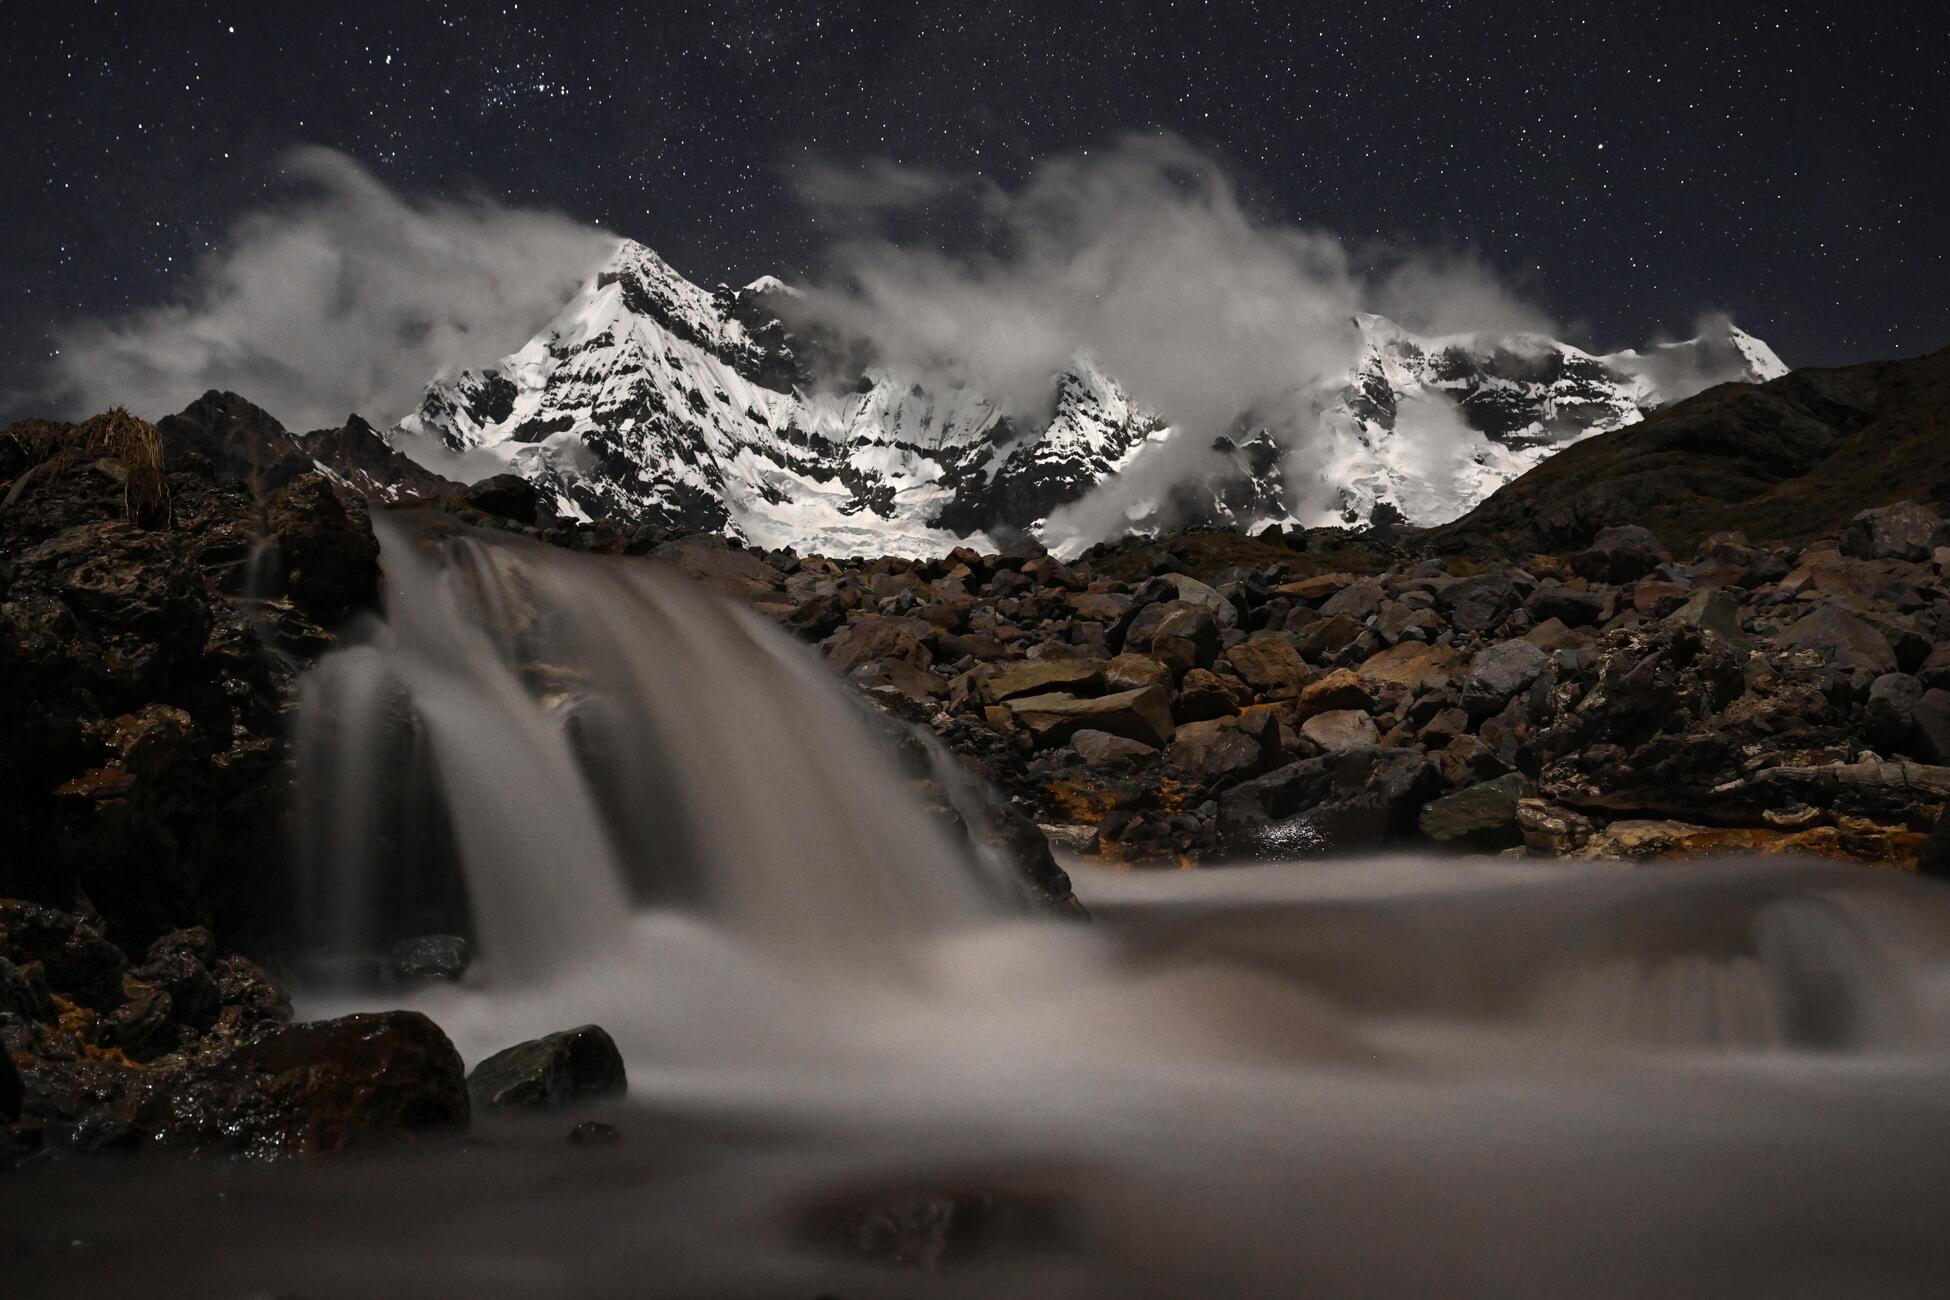 Photograph of a waterfall at night with large snow covered mountains in the background